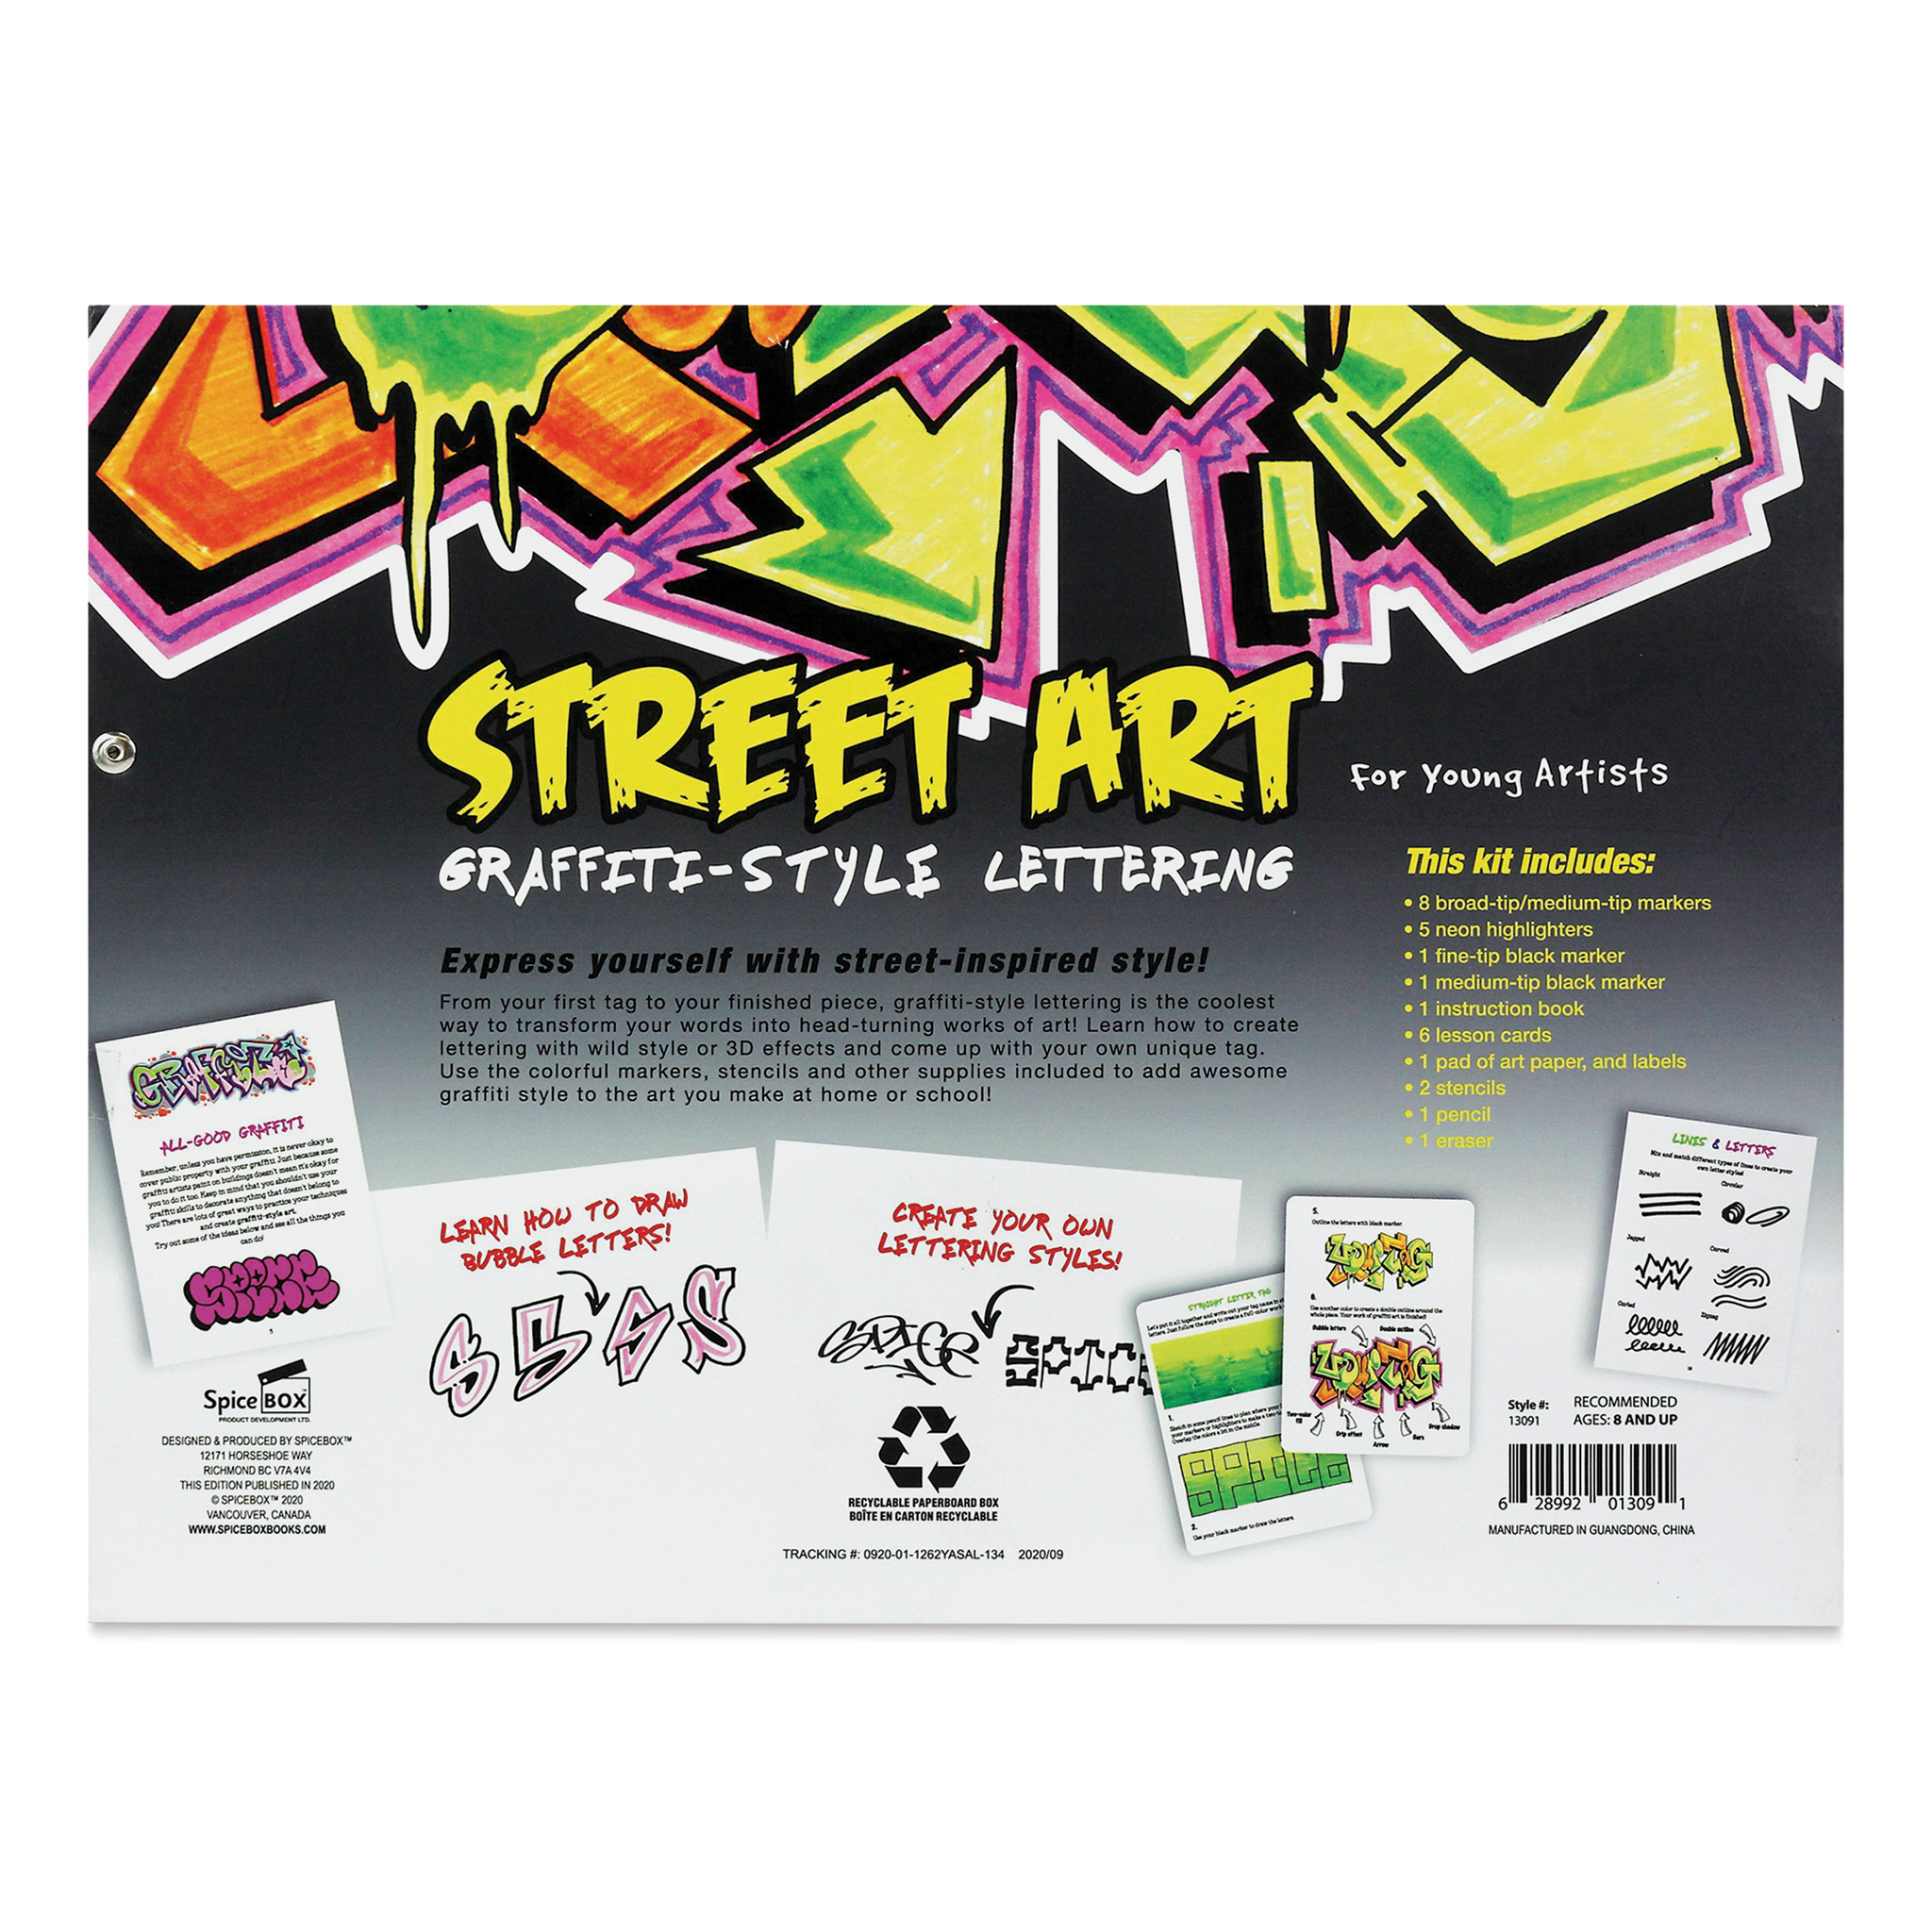 SpiceBox Street Art for Young Artists Kit